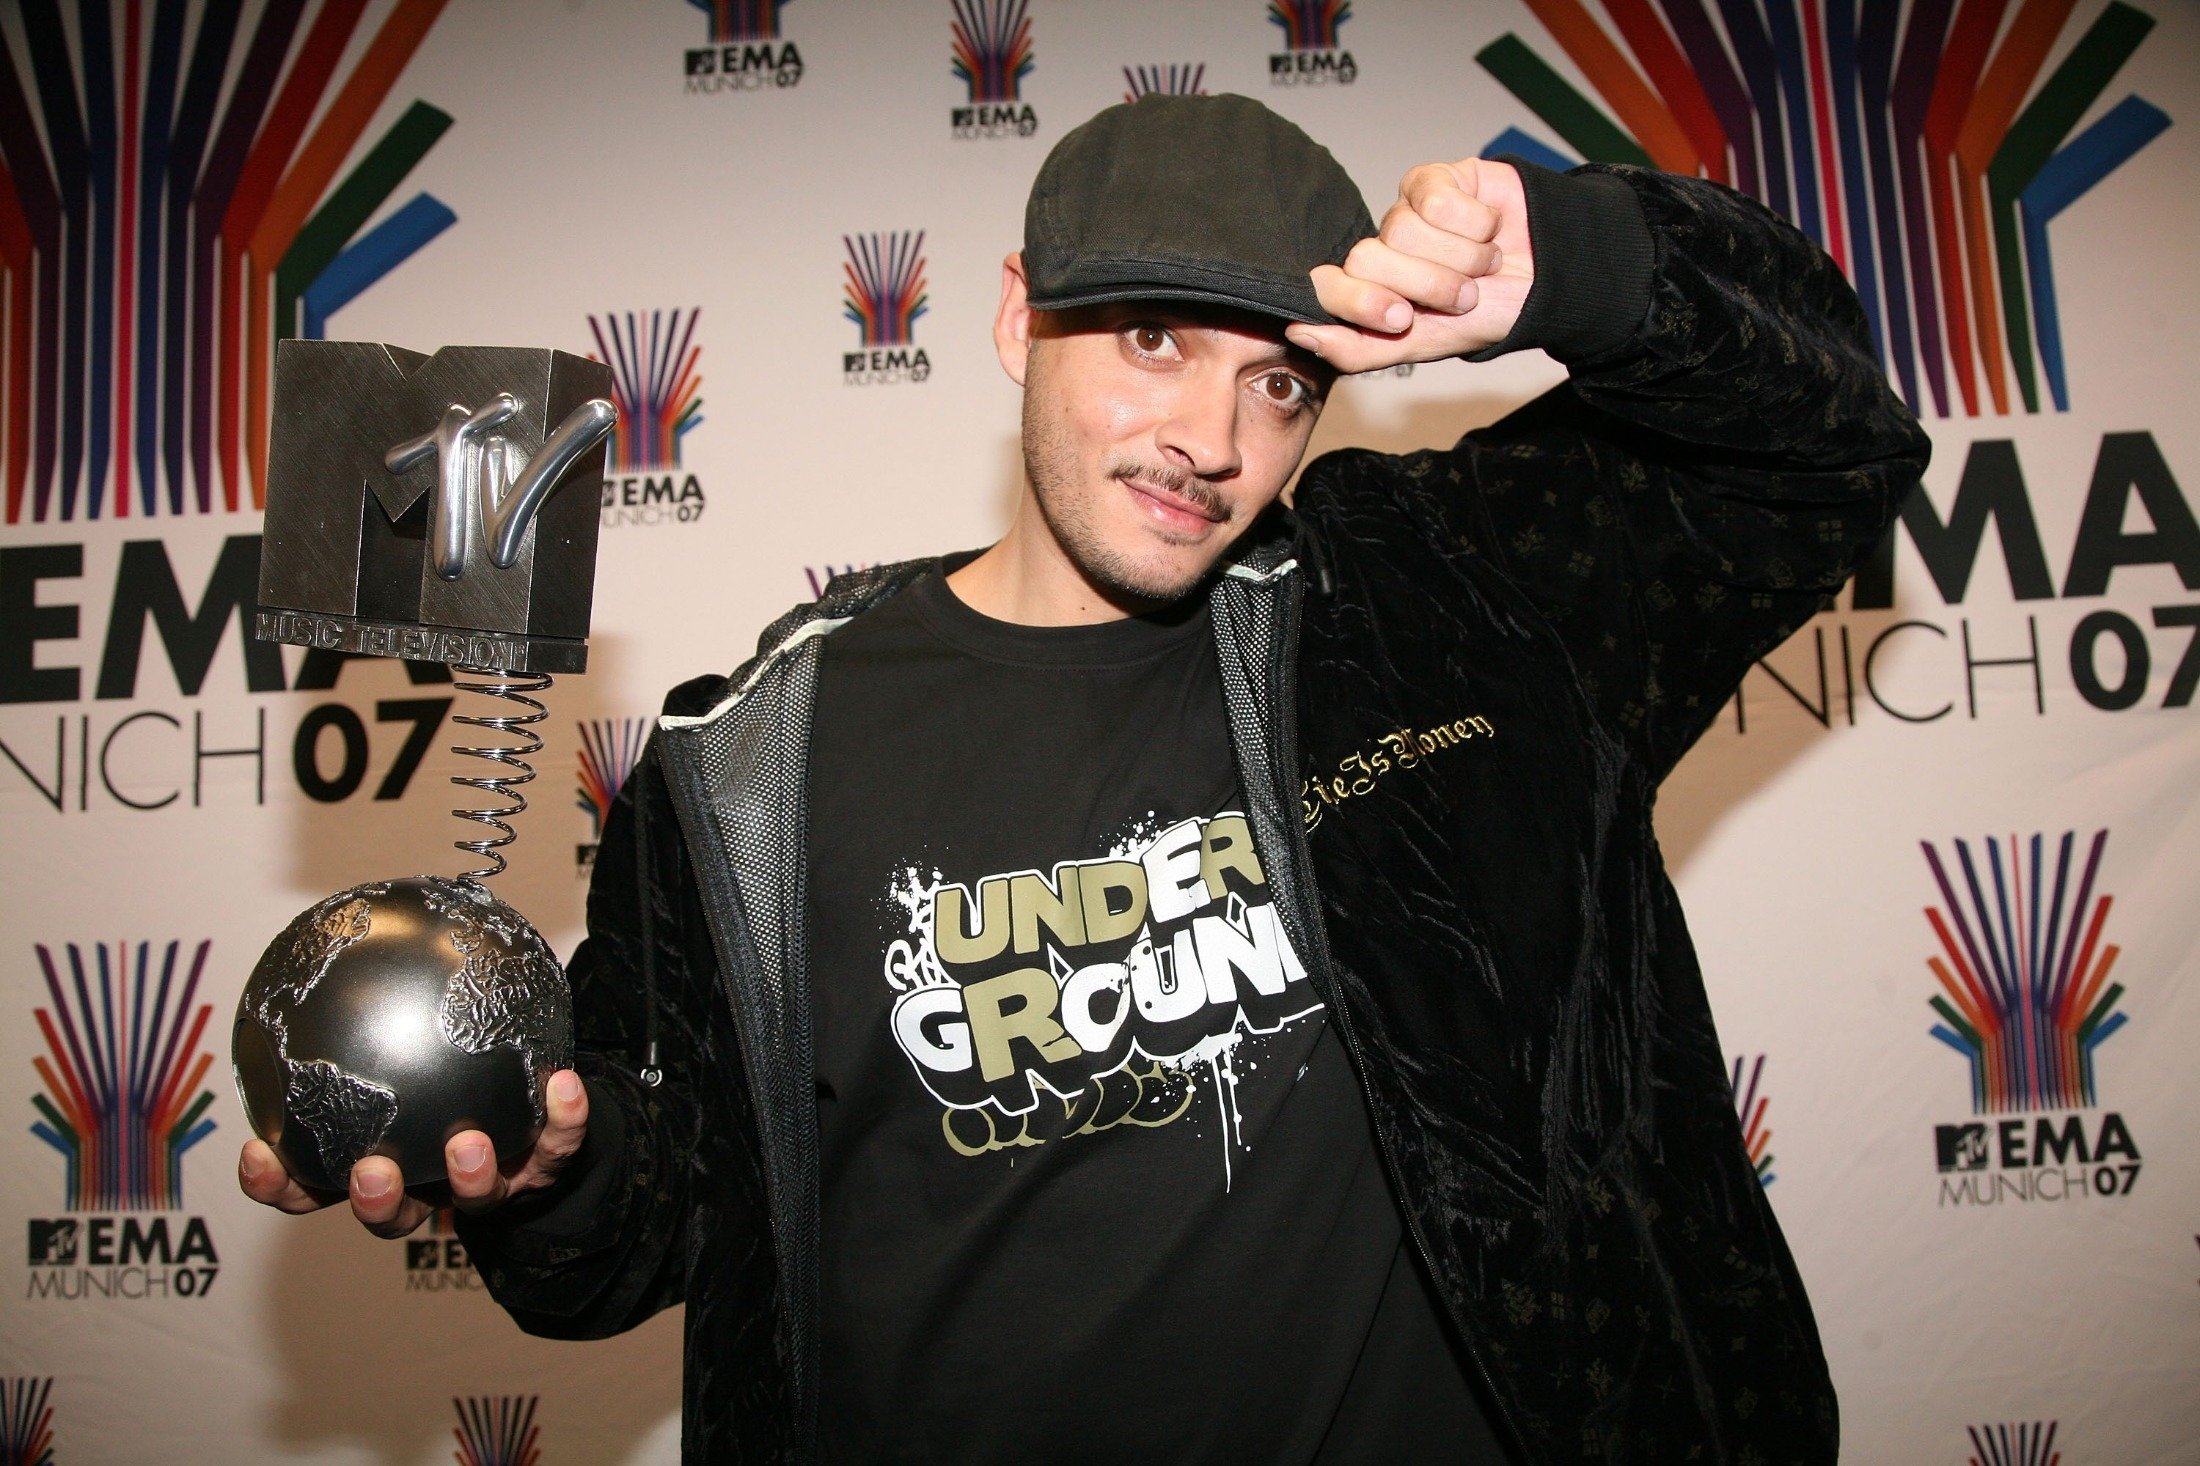 Turkish rapper Ceza poses with a MTV award during the MTV Europe Music Awards 2007 at Olympiahalle in Munich, Germany, Nov. 1, 2007. (Getty Images)